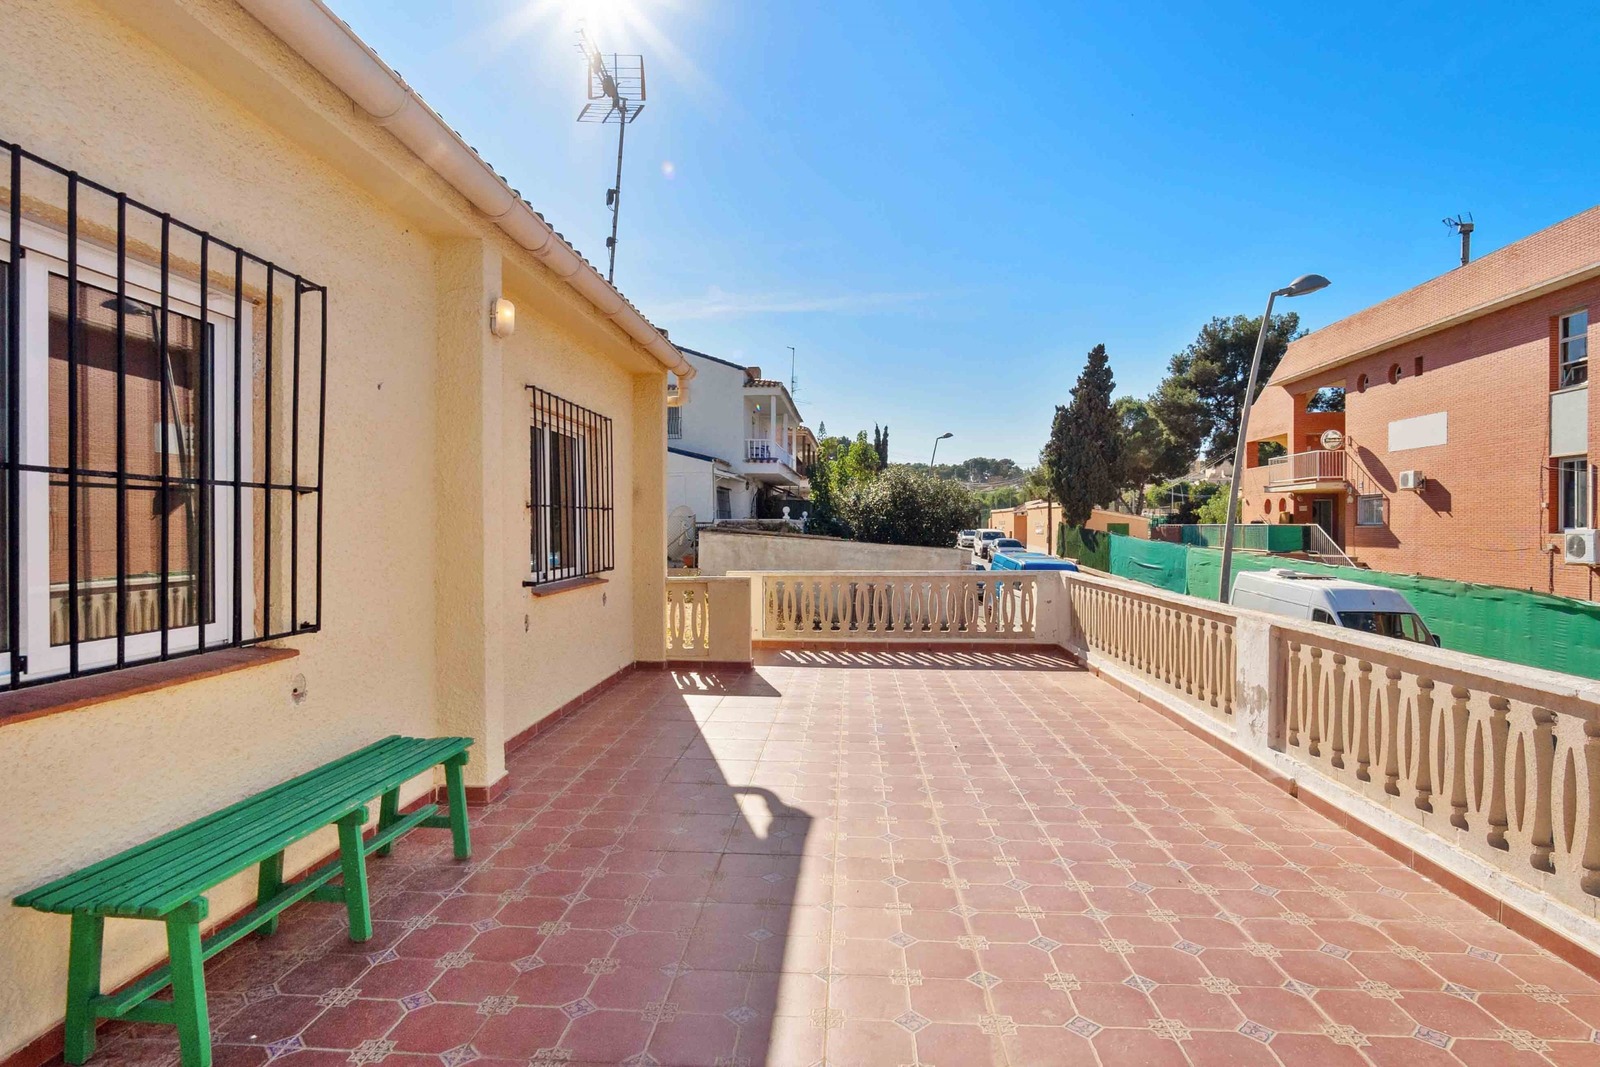 Terraced townhouse for sale with garage on a plot of 400m2 in Los Balcones, Torrevieja.